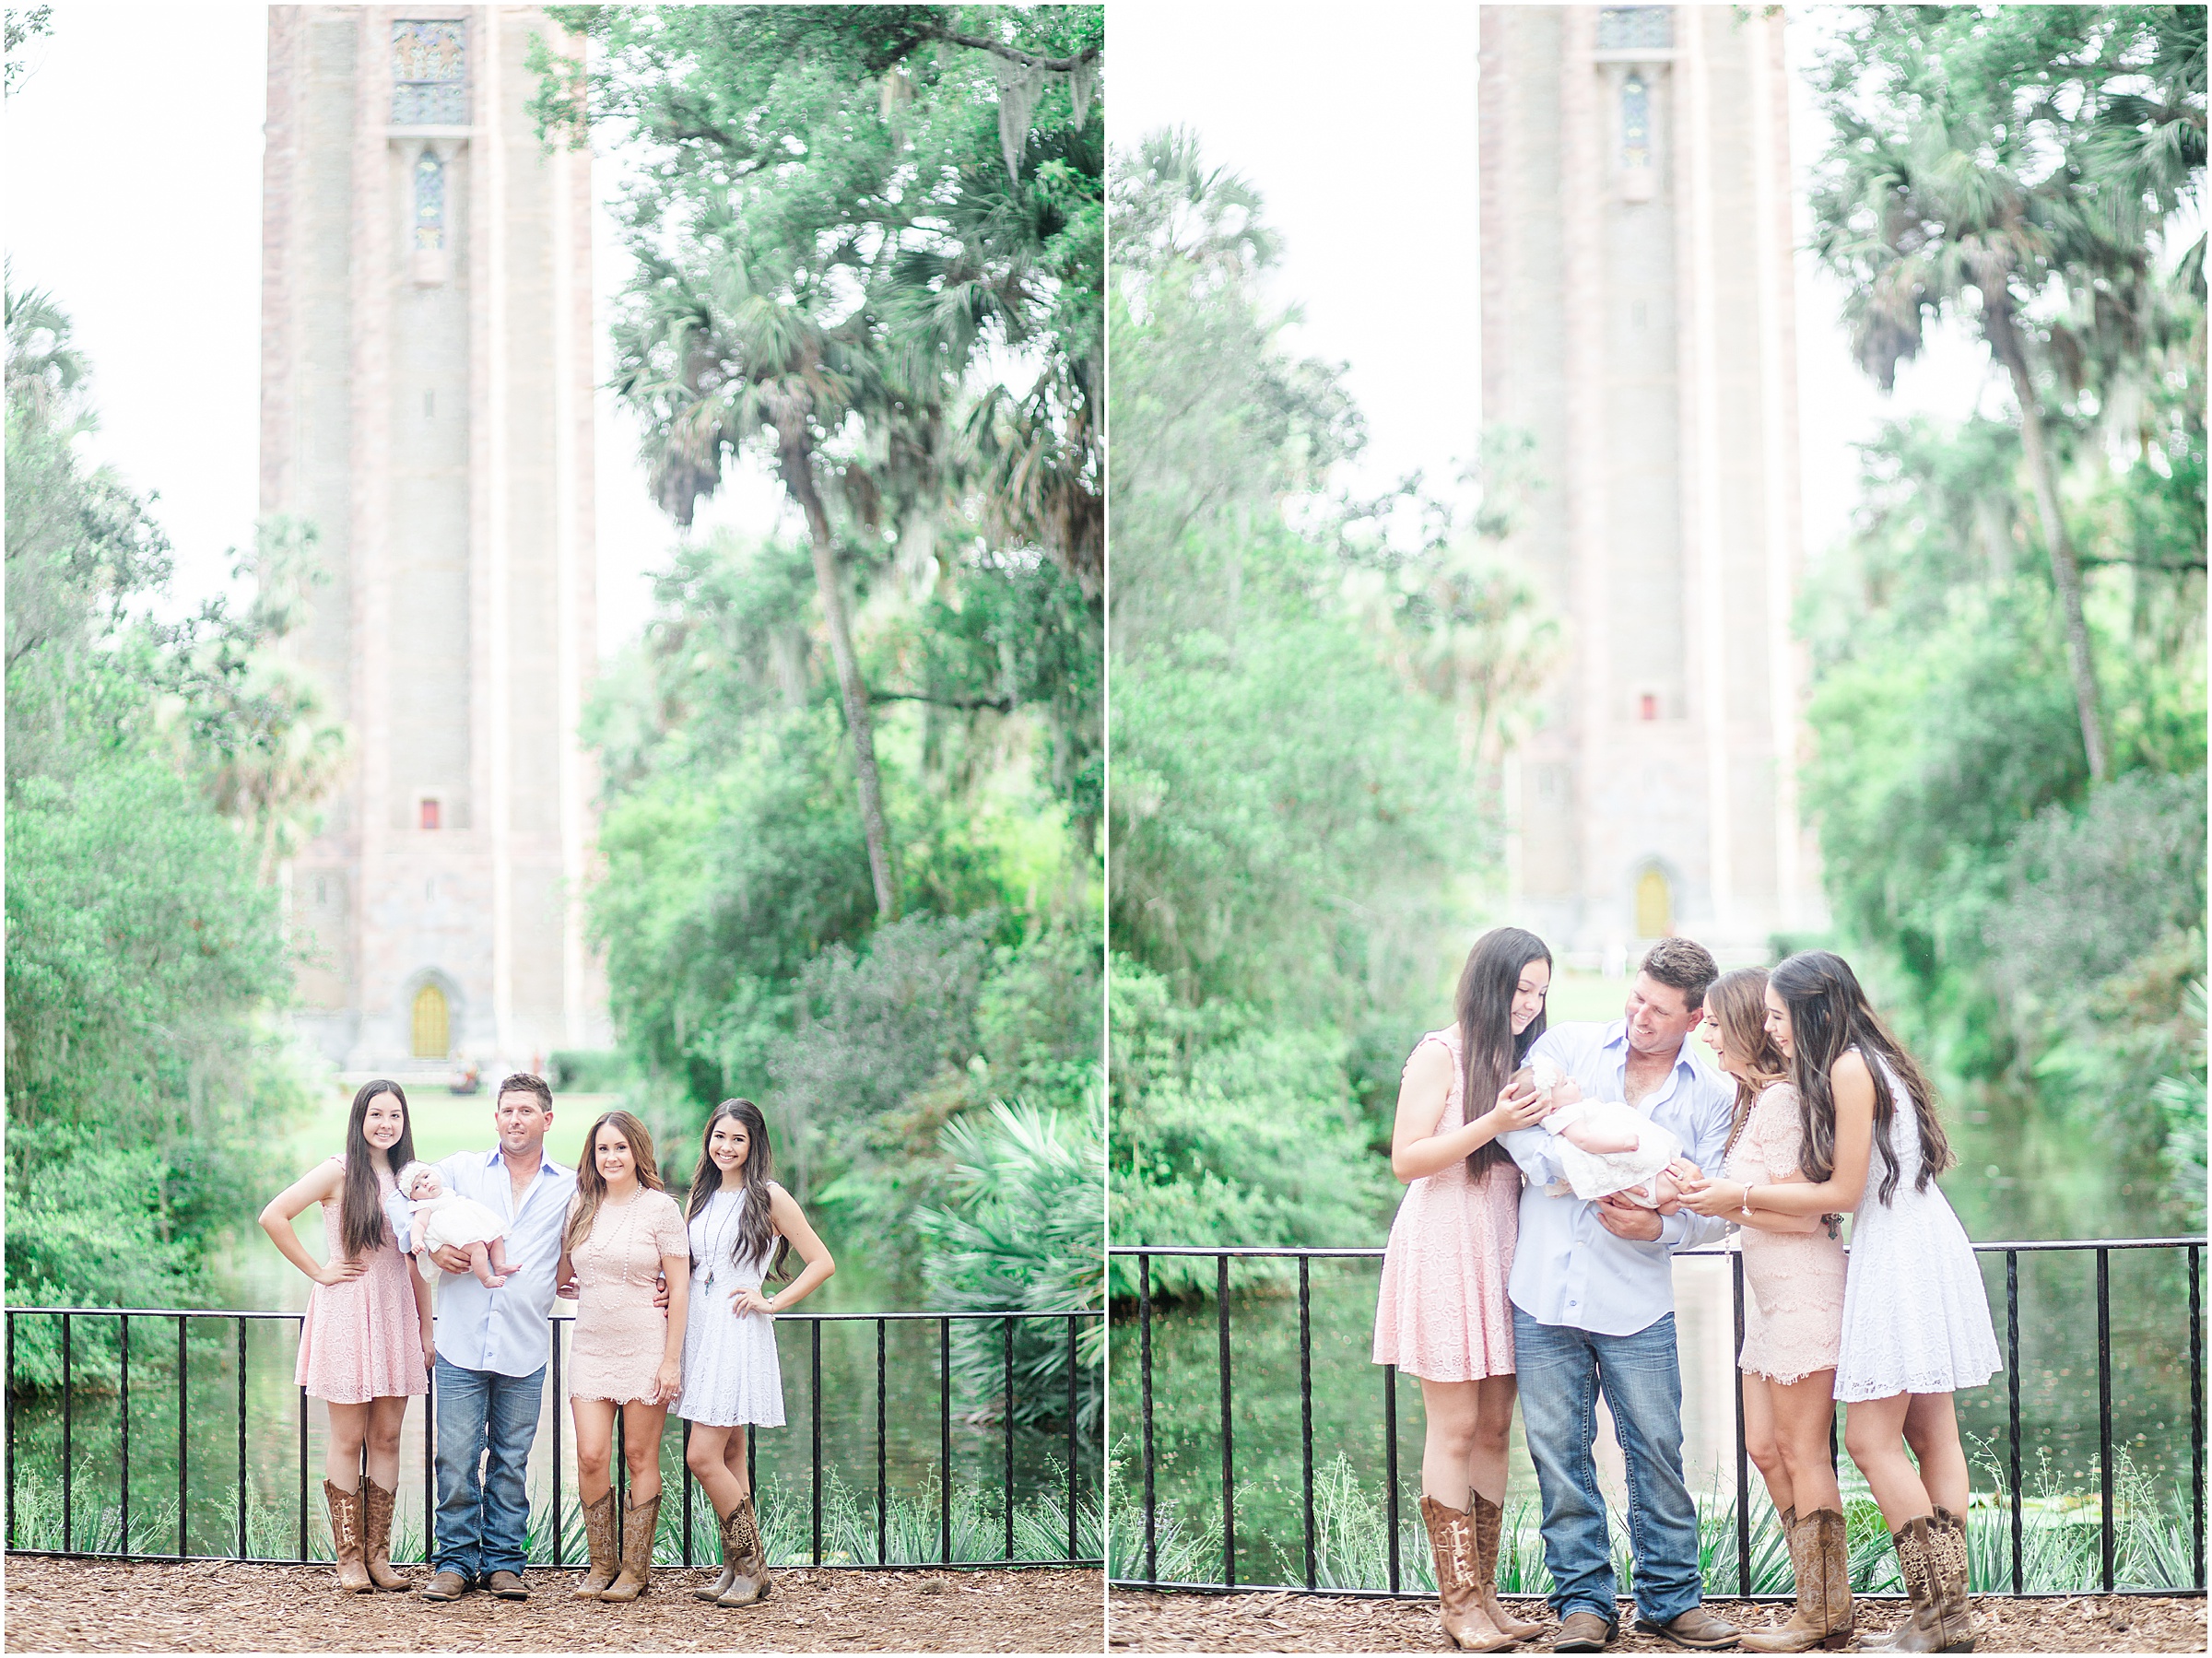 Jessica & Brad, along with their family, take photos in front of the Tower at Bok Tower Gardens in Lake Wales, Florida.